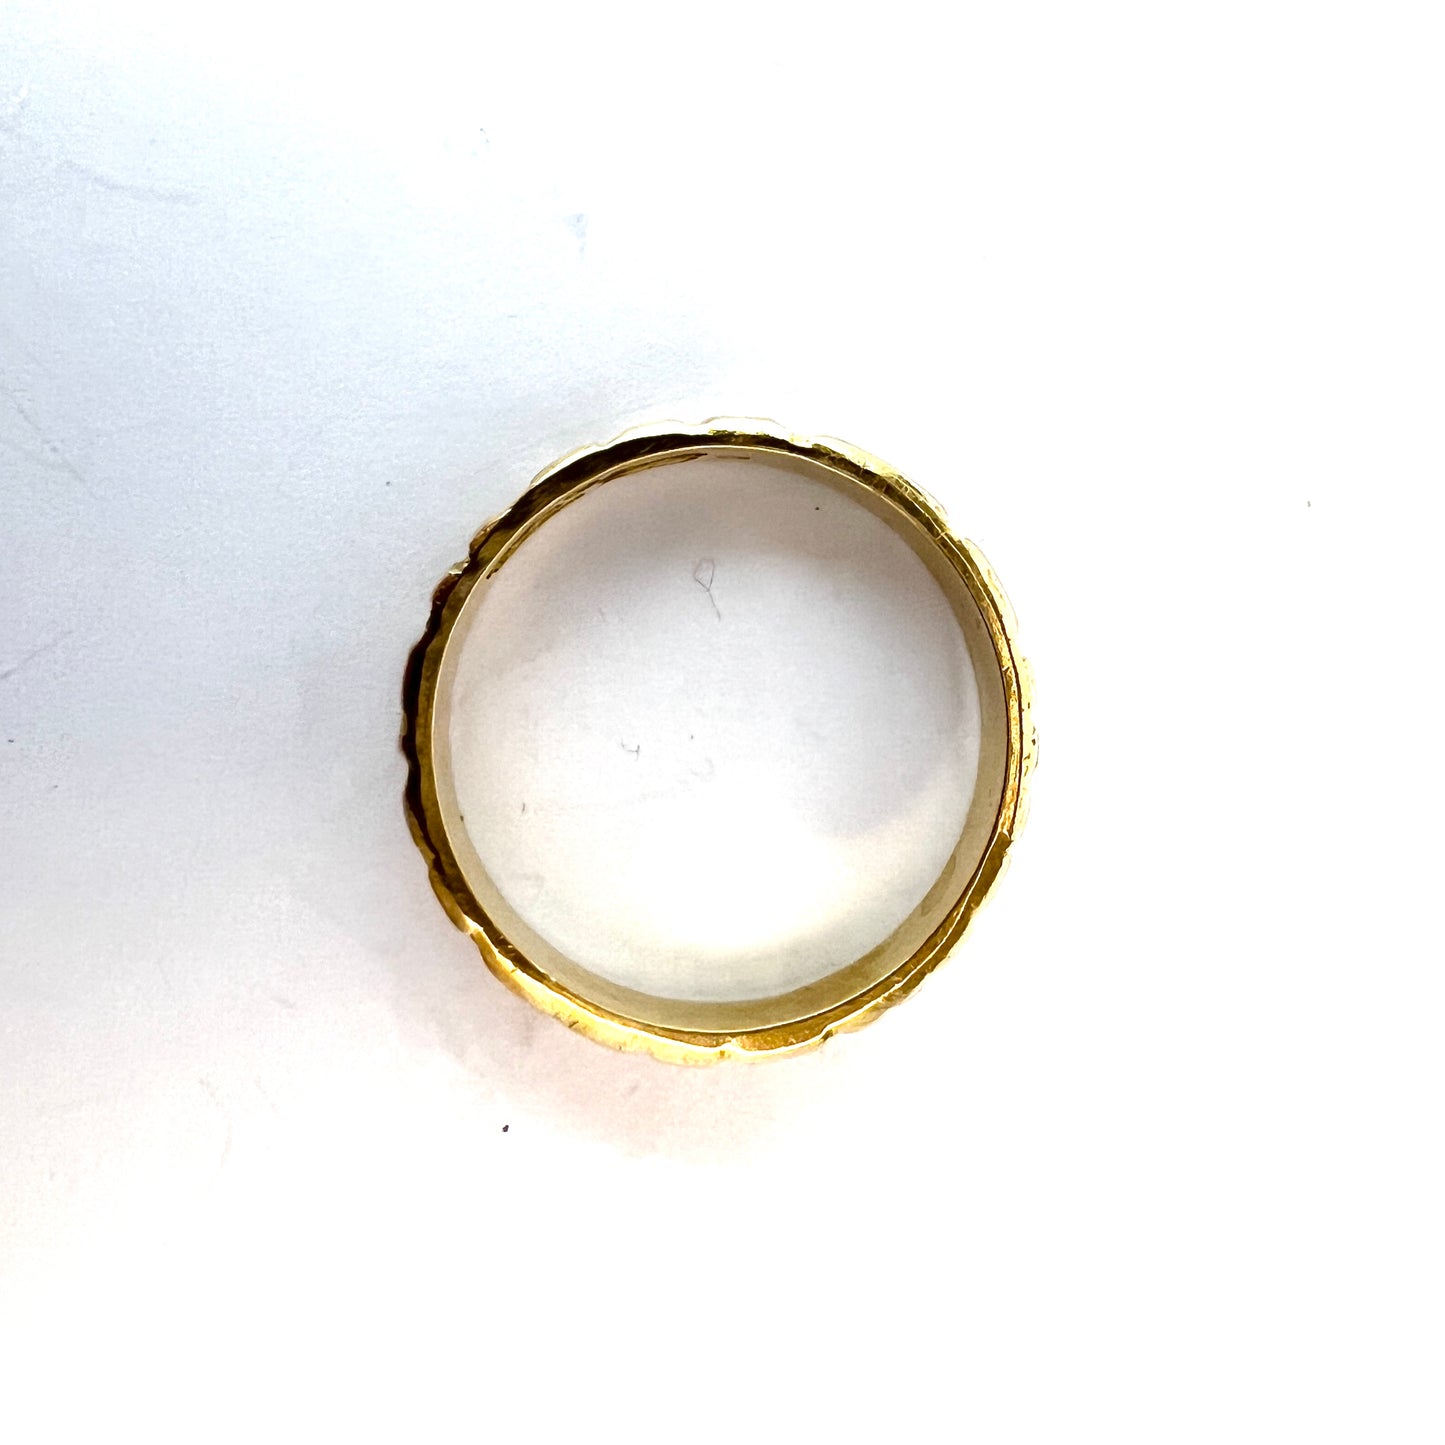 Bjorn Weckstrom, Lapponia year 1970. Vintage 18k Gold Unisex Ring Band. Signed.